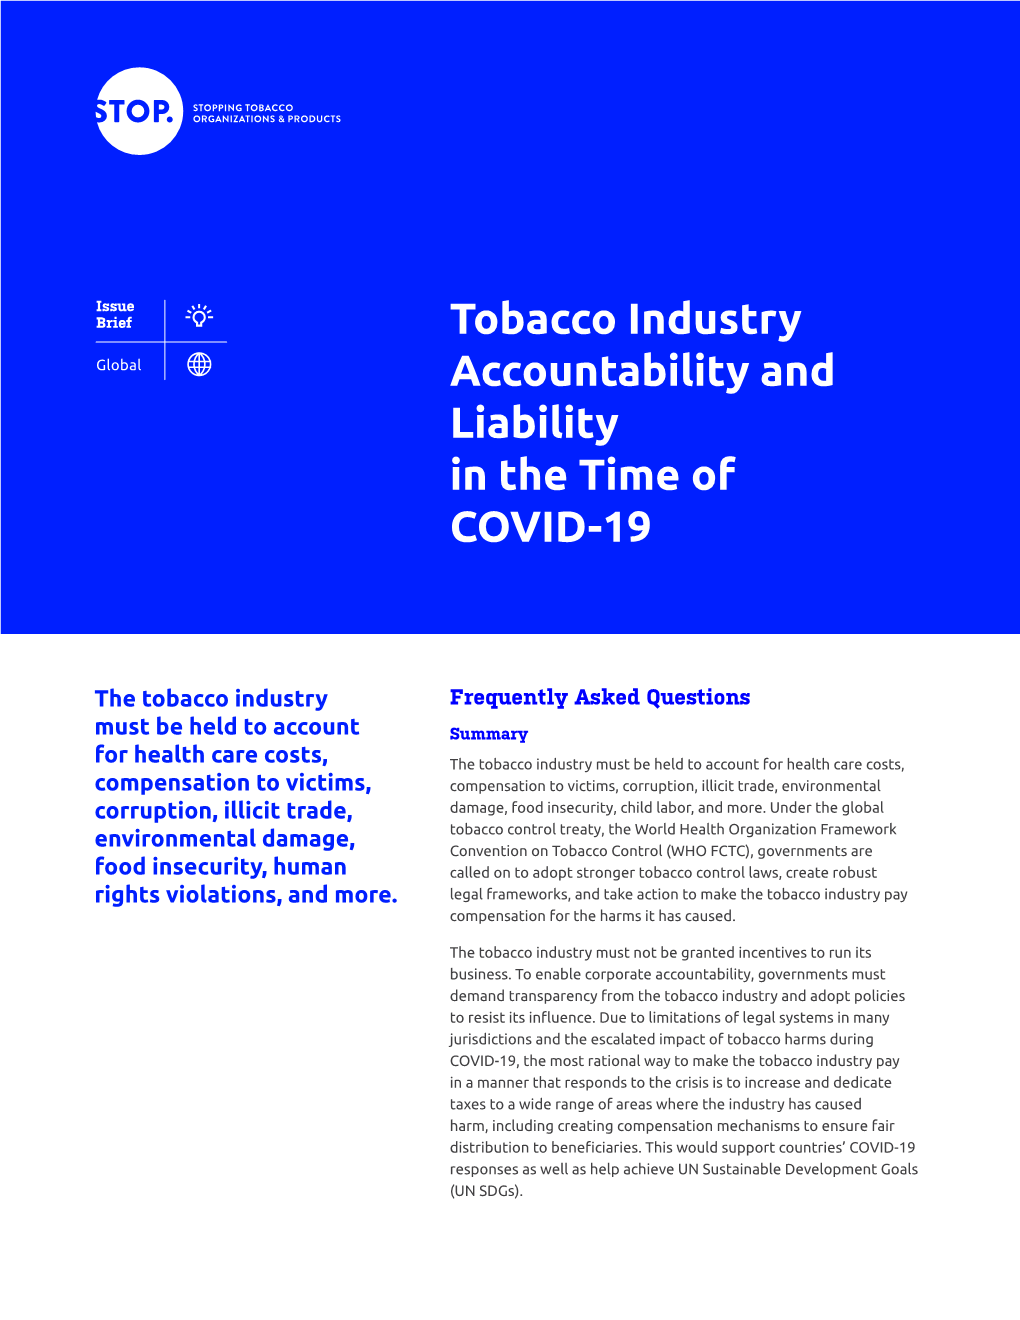 Tobacco Industry Accountability and Liability in the Time of COVID-19